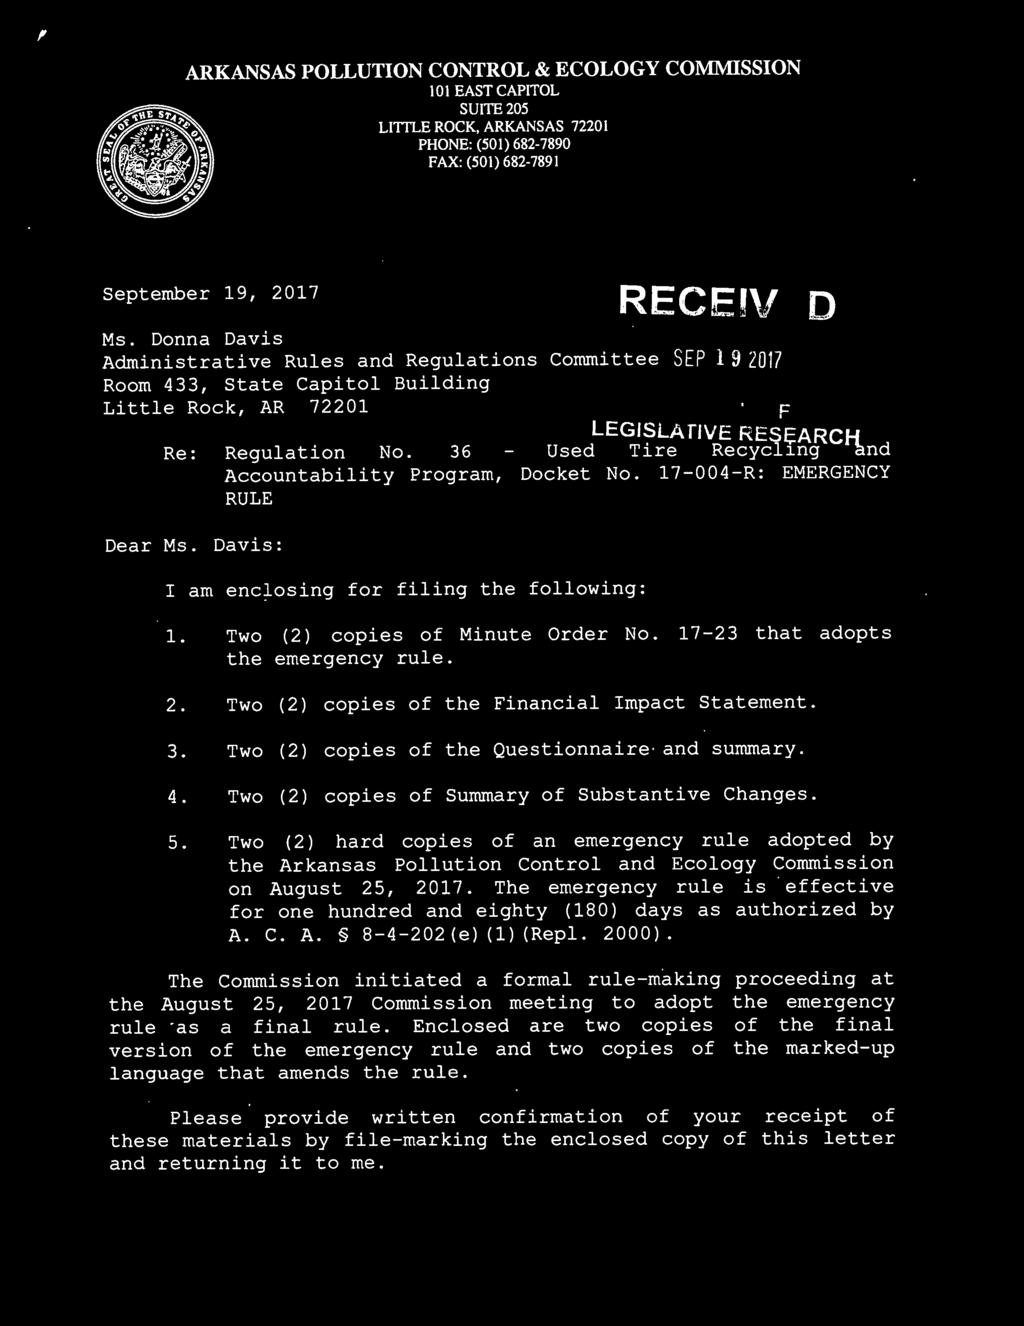 c'"""I;:ARCf-f Regulation No. 36 Used Tire Recycl1ng and Accountability Program, Docket No. 17-004-R: EMERGENCY RULE I am enclosing for filing the following: 1. Two (2) copies of Minute Order No.